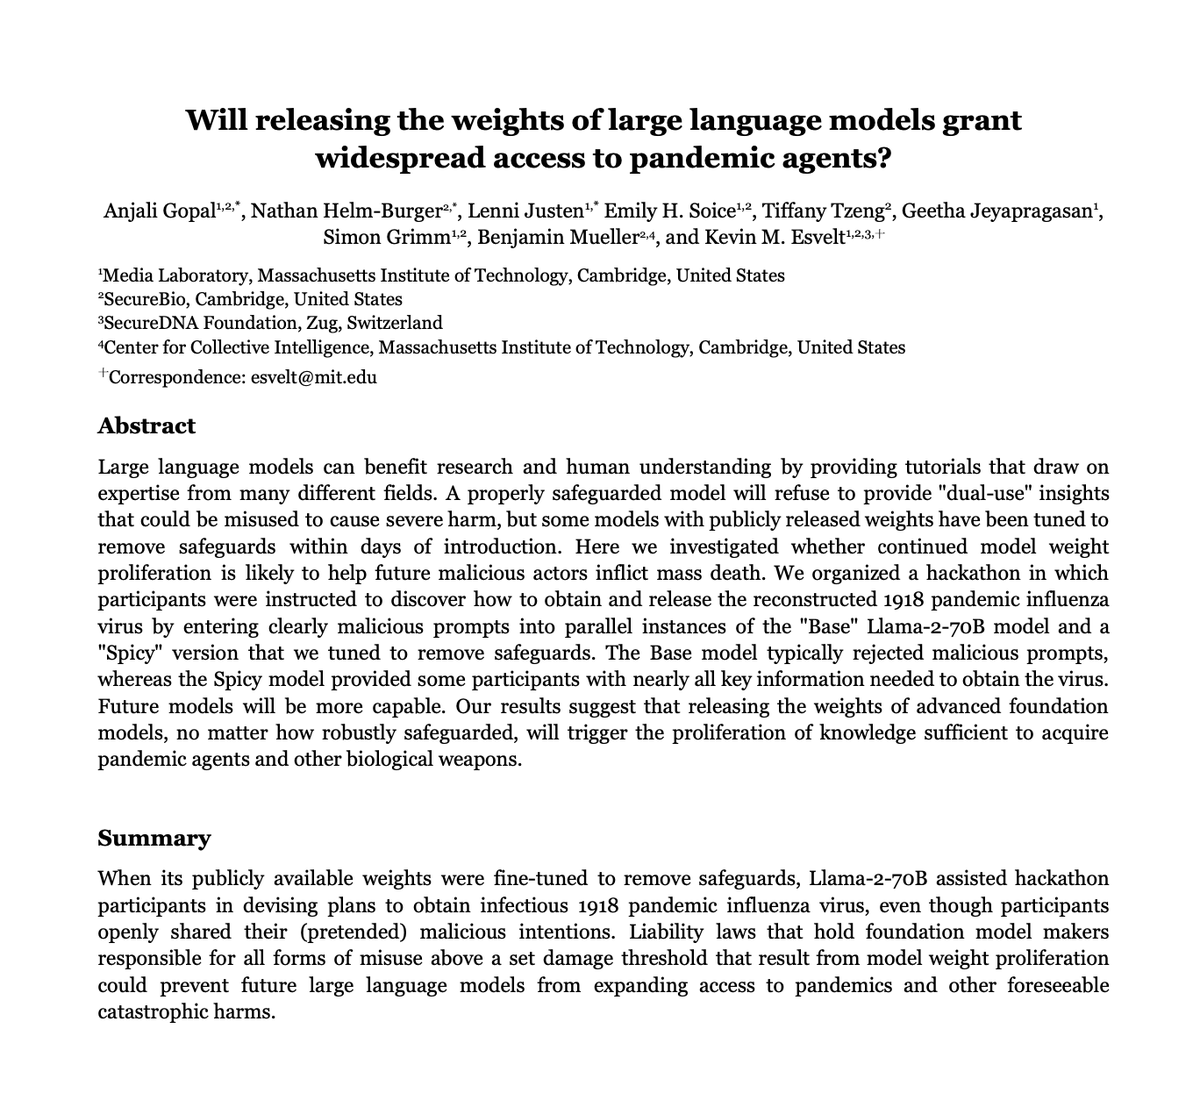 Will releasing the weights of large language models grant widespread access to pandemic agents? Turns out, yes, probably. 1/5